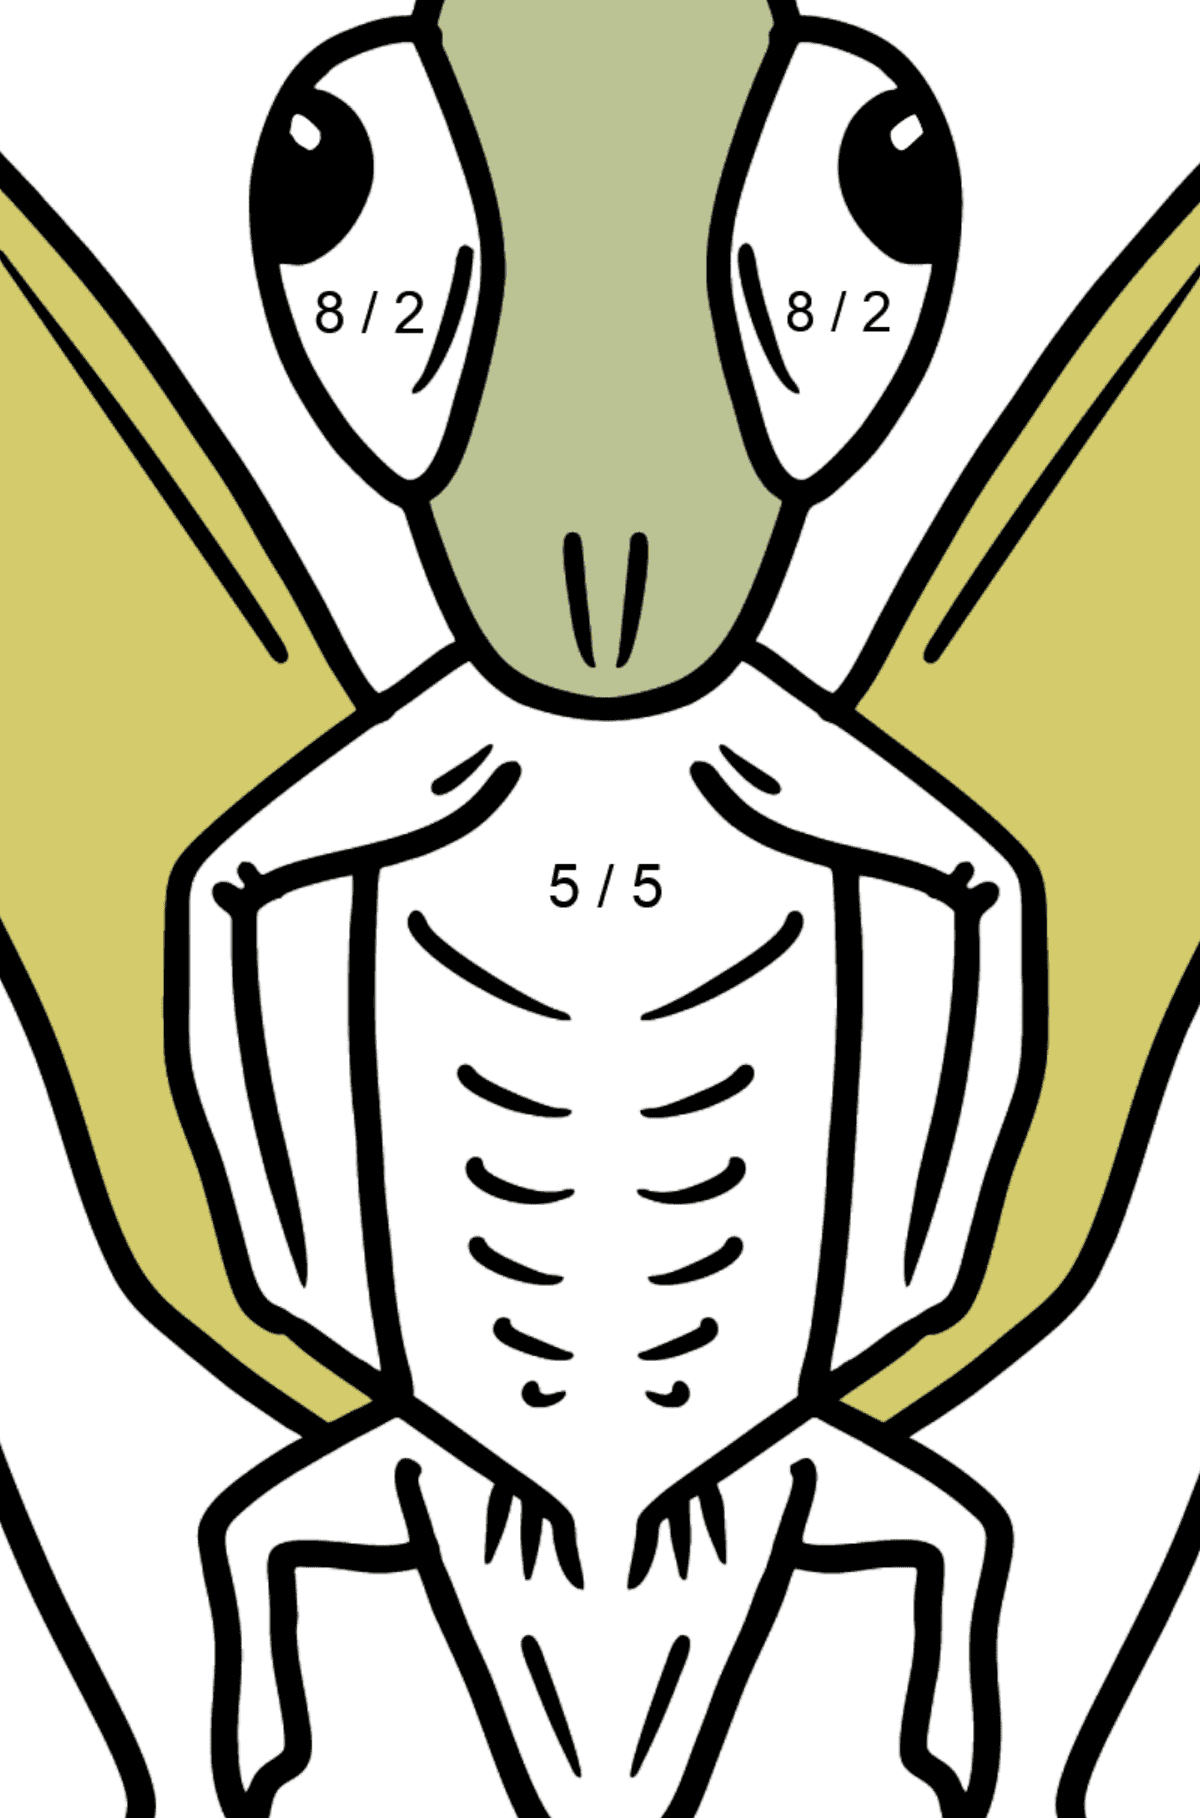 Grasshopper coloring page - Math Coloring - Division for Kids